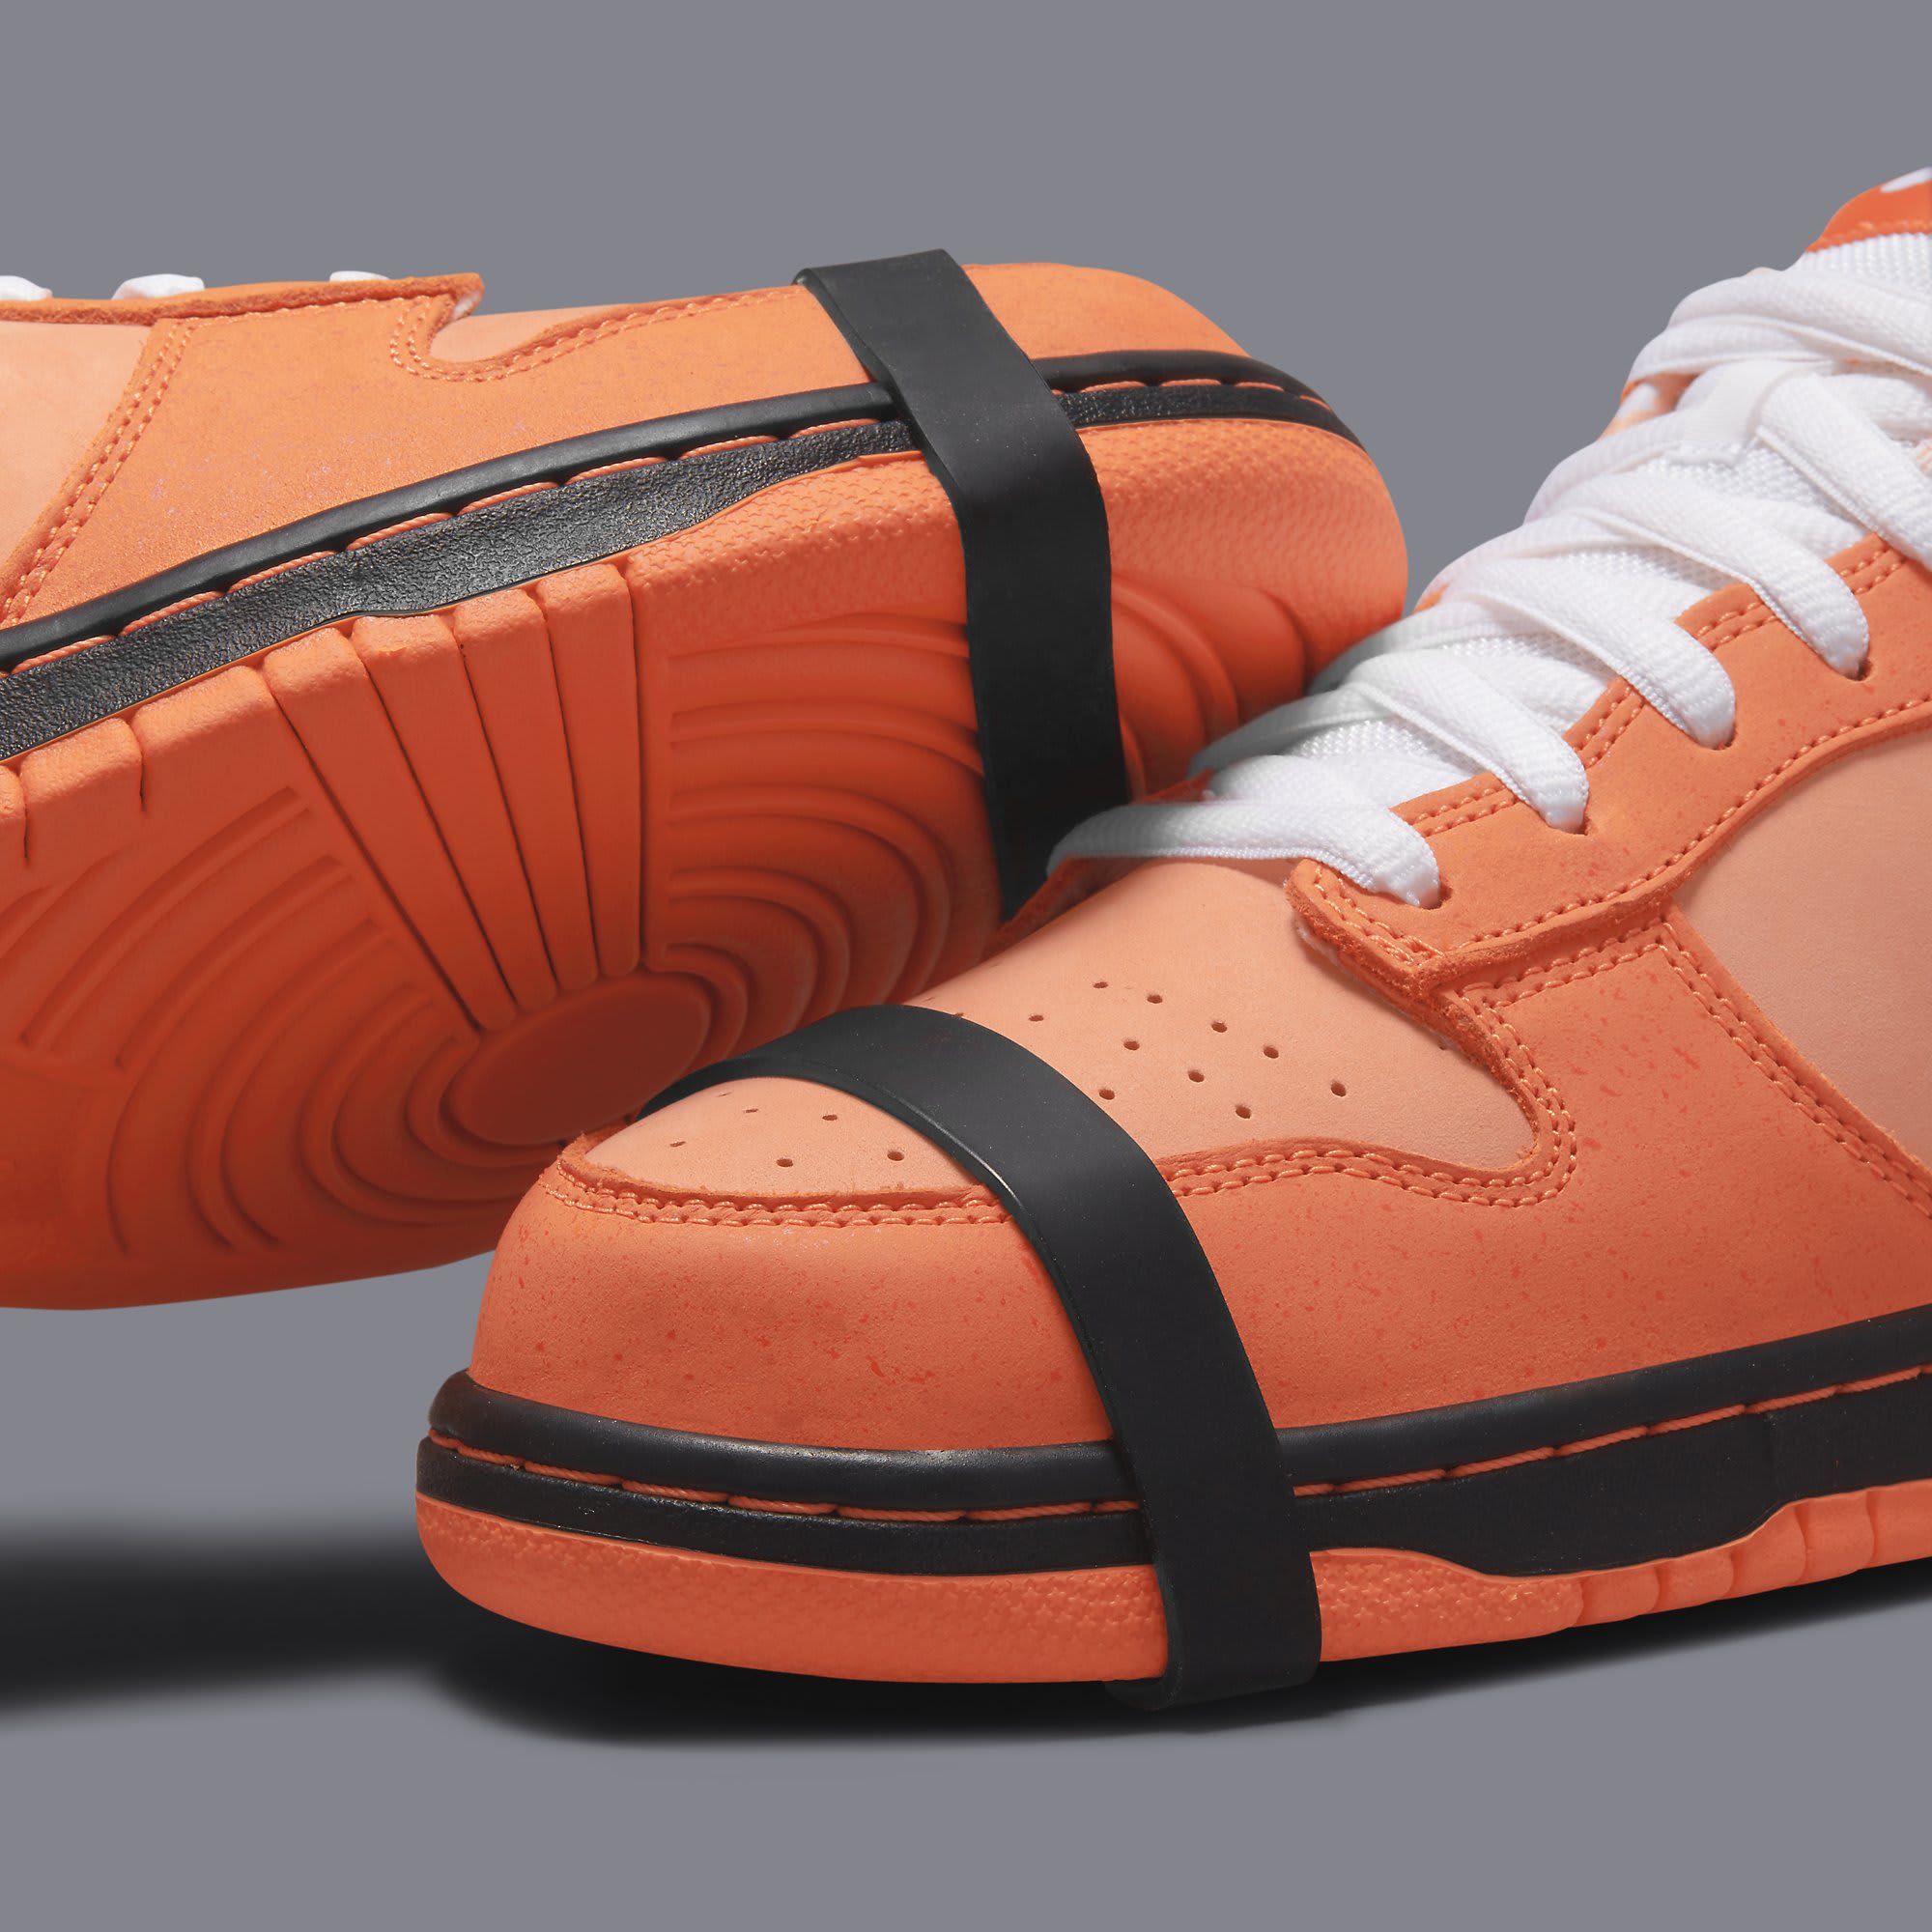 Concepts x Nike SB Dunk Low &#x27;Orange Lobster&#x27; FD8776 800 Rubber Bands